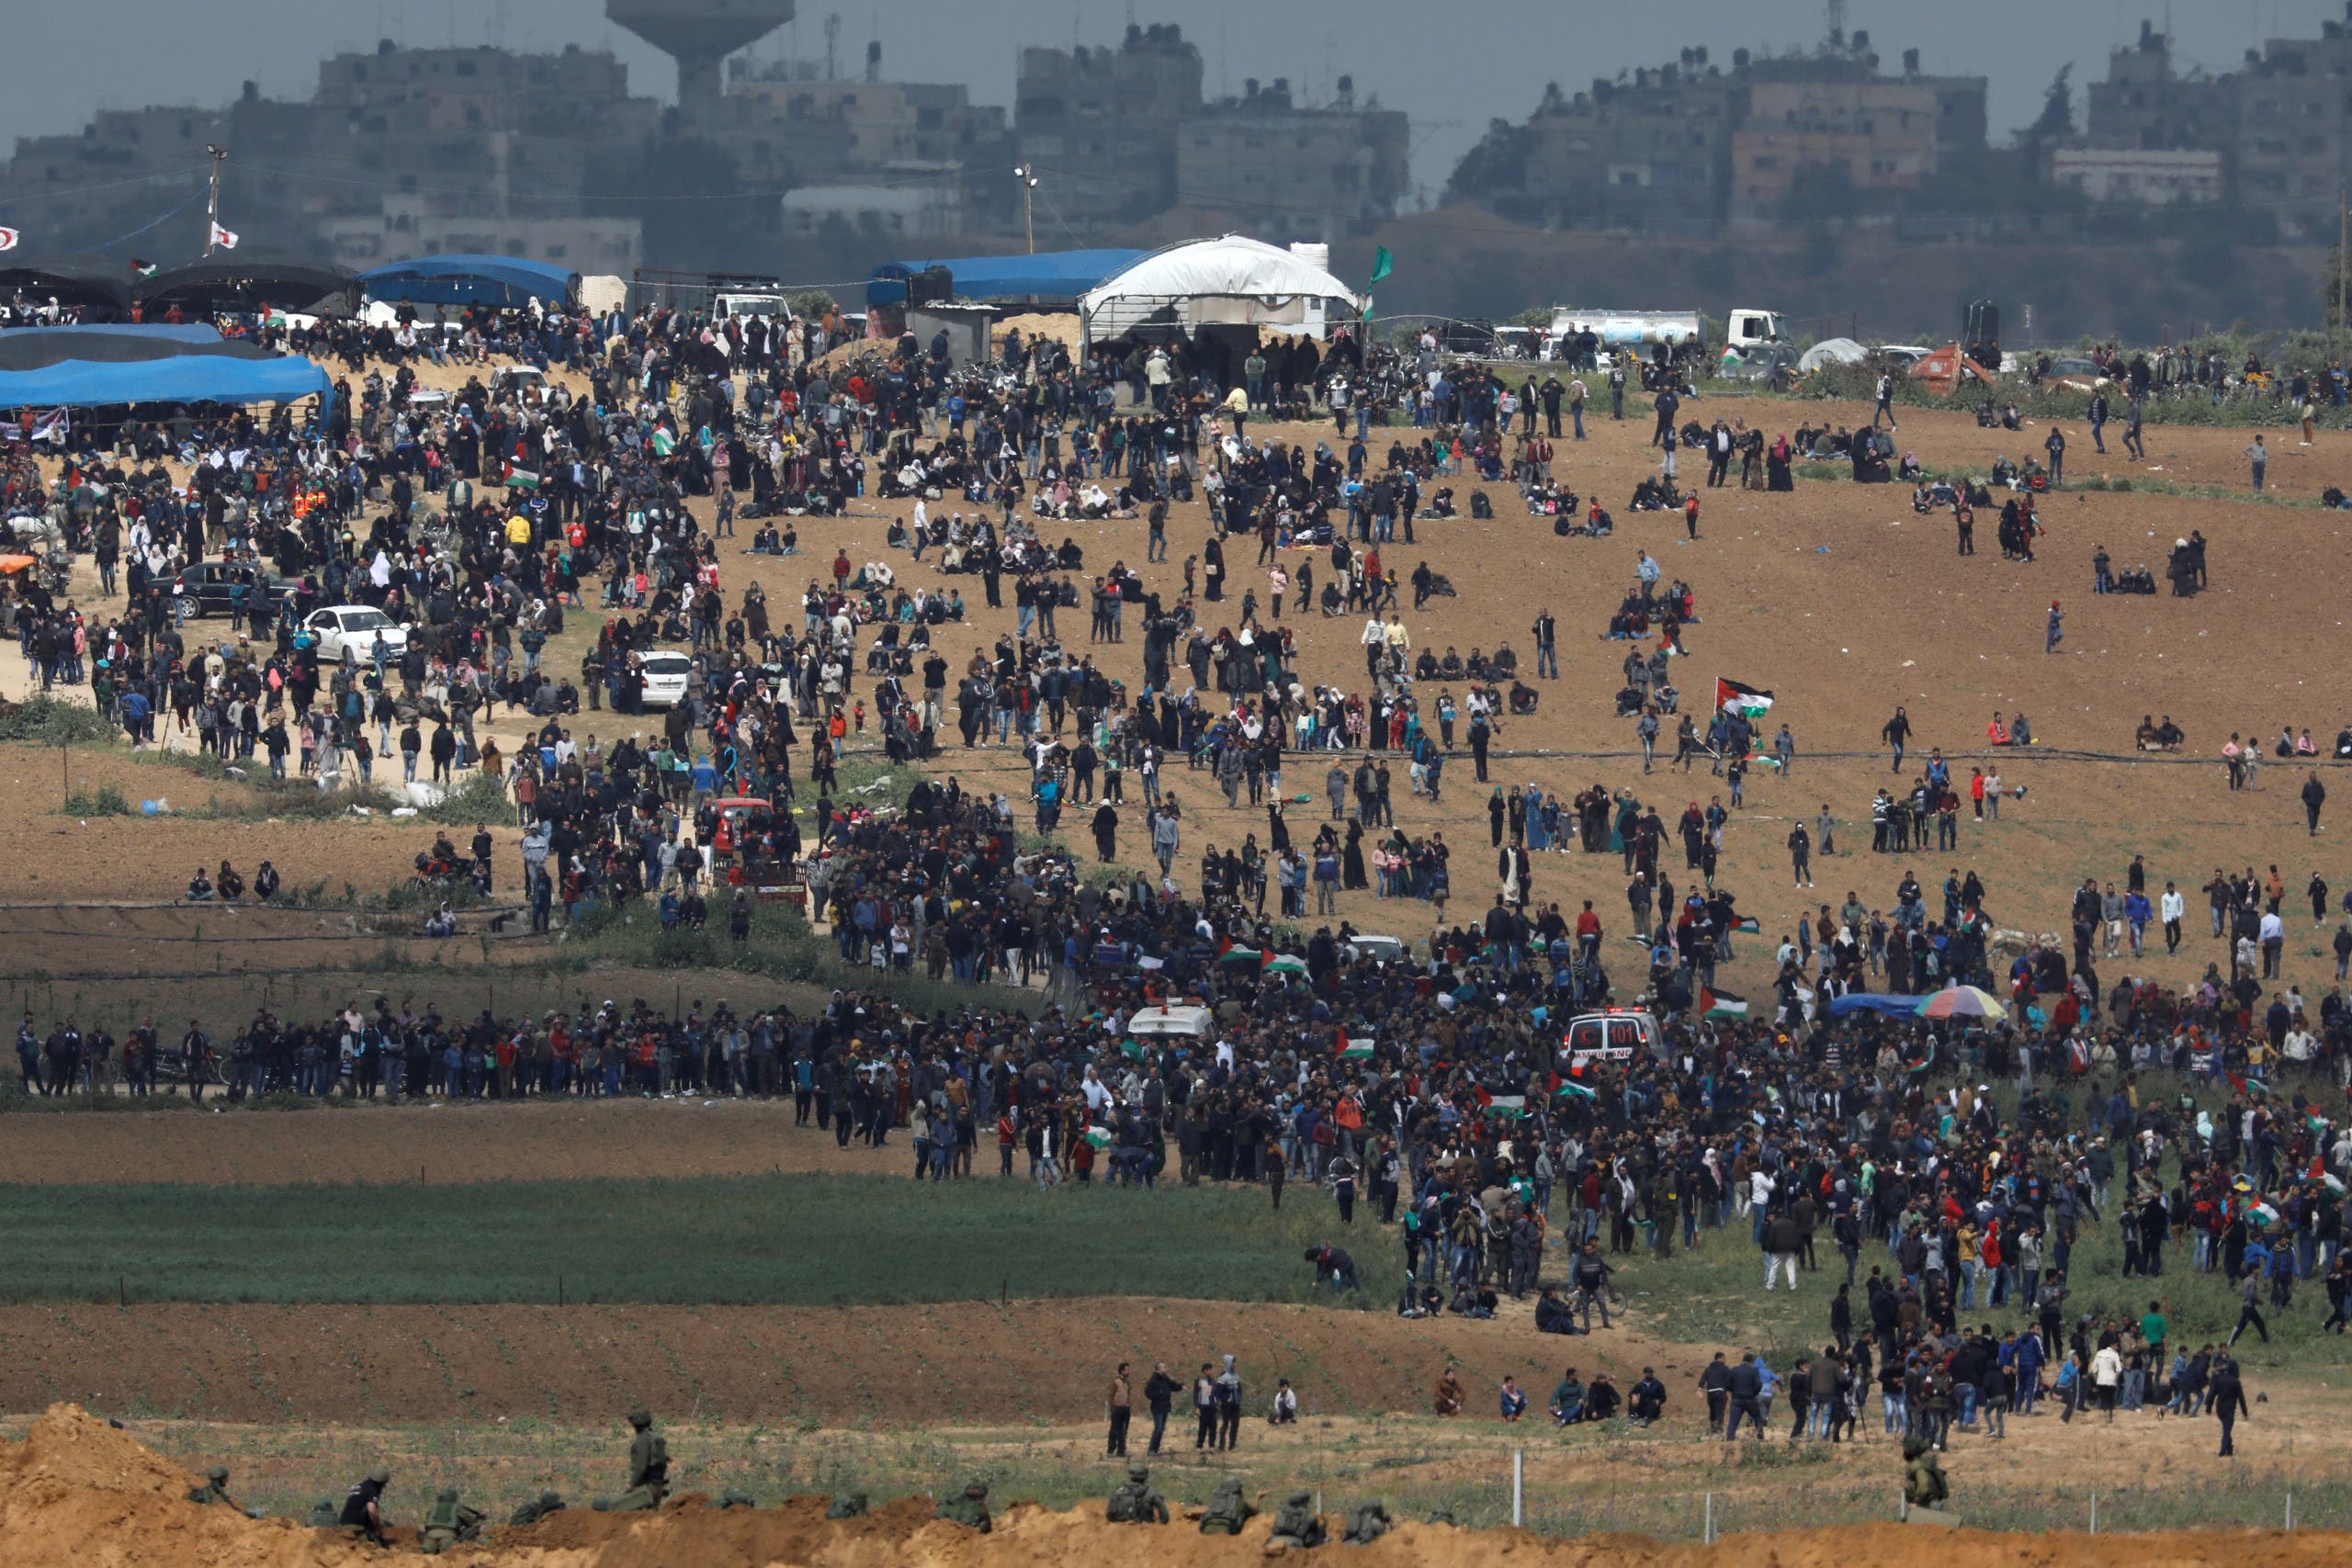 Palestinians attend a tent city protest along the Israel border with Gaza, demanding the right to return to their homeland, east of Gaza City March 30, 2018. REUTERS